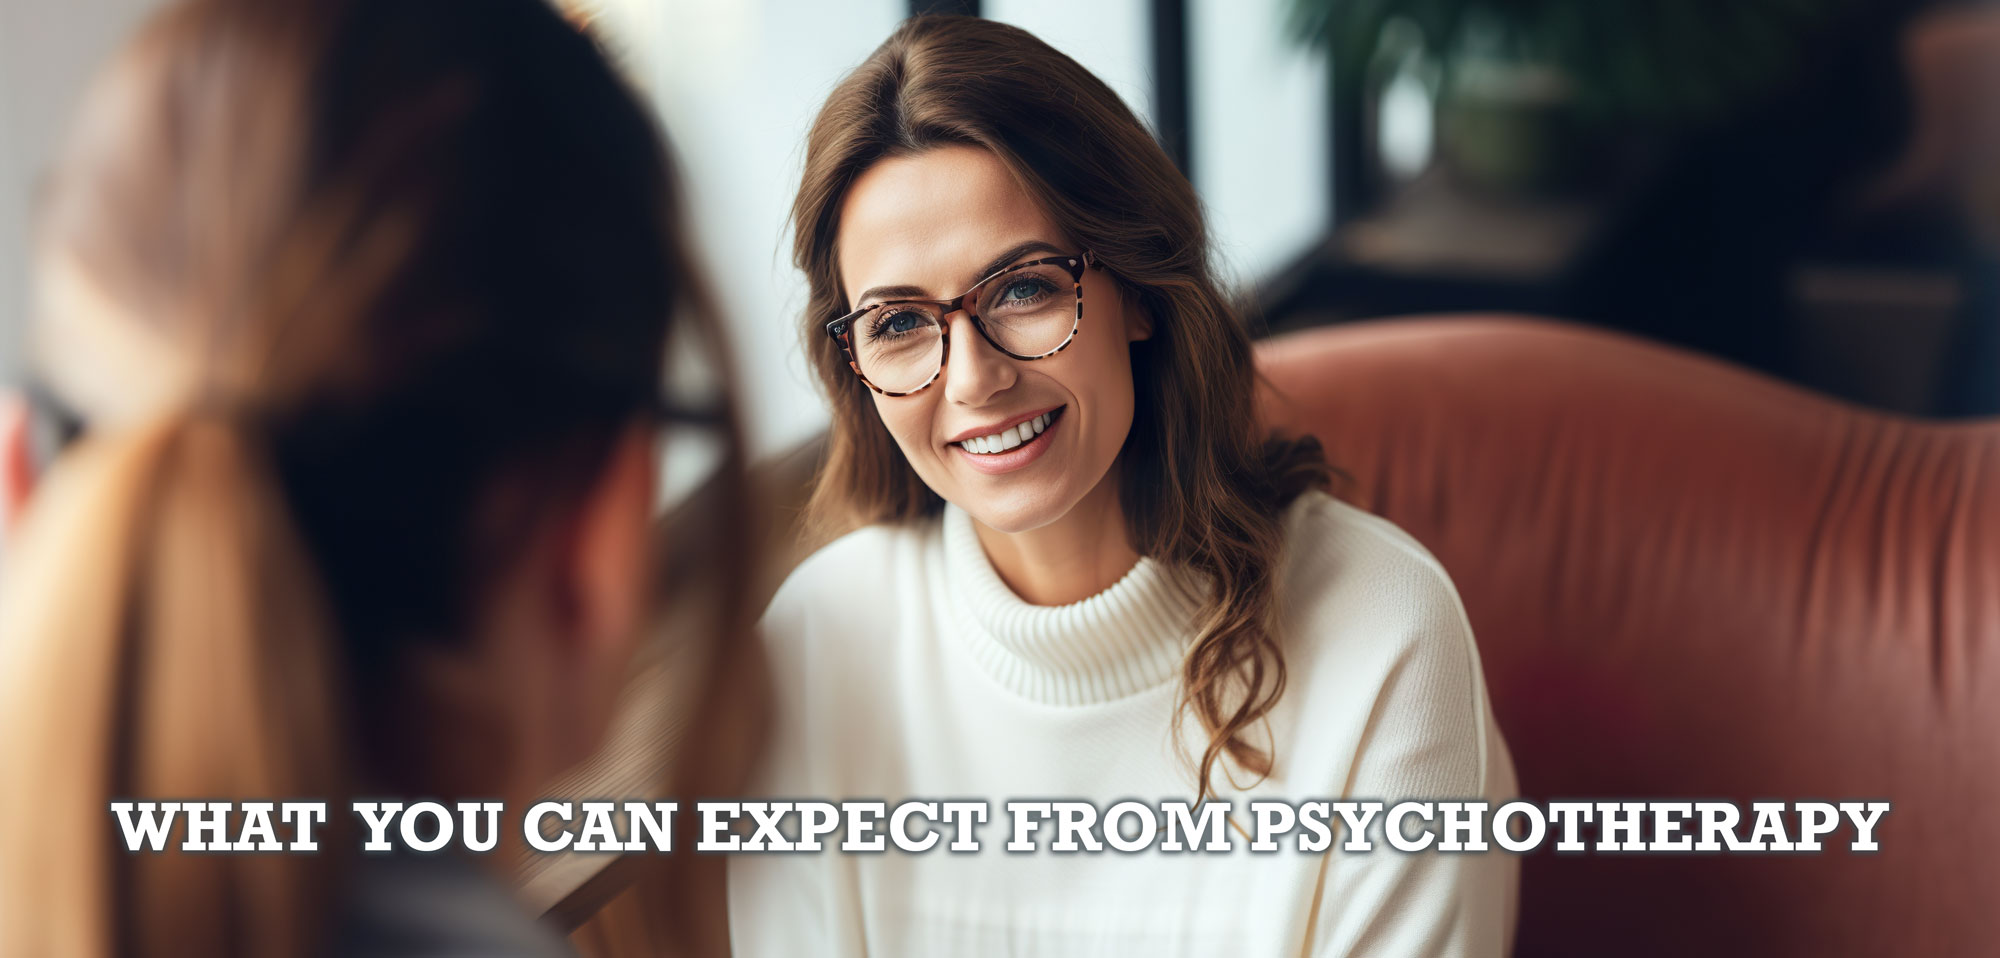 What you can expect from psychotherapy